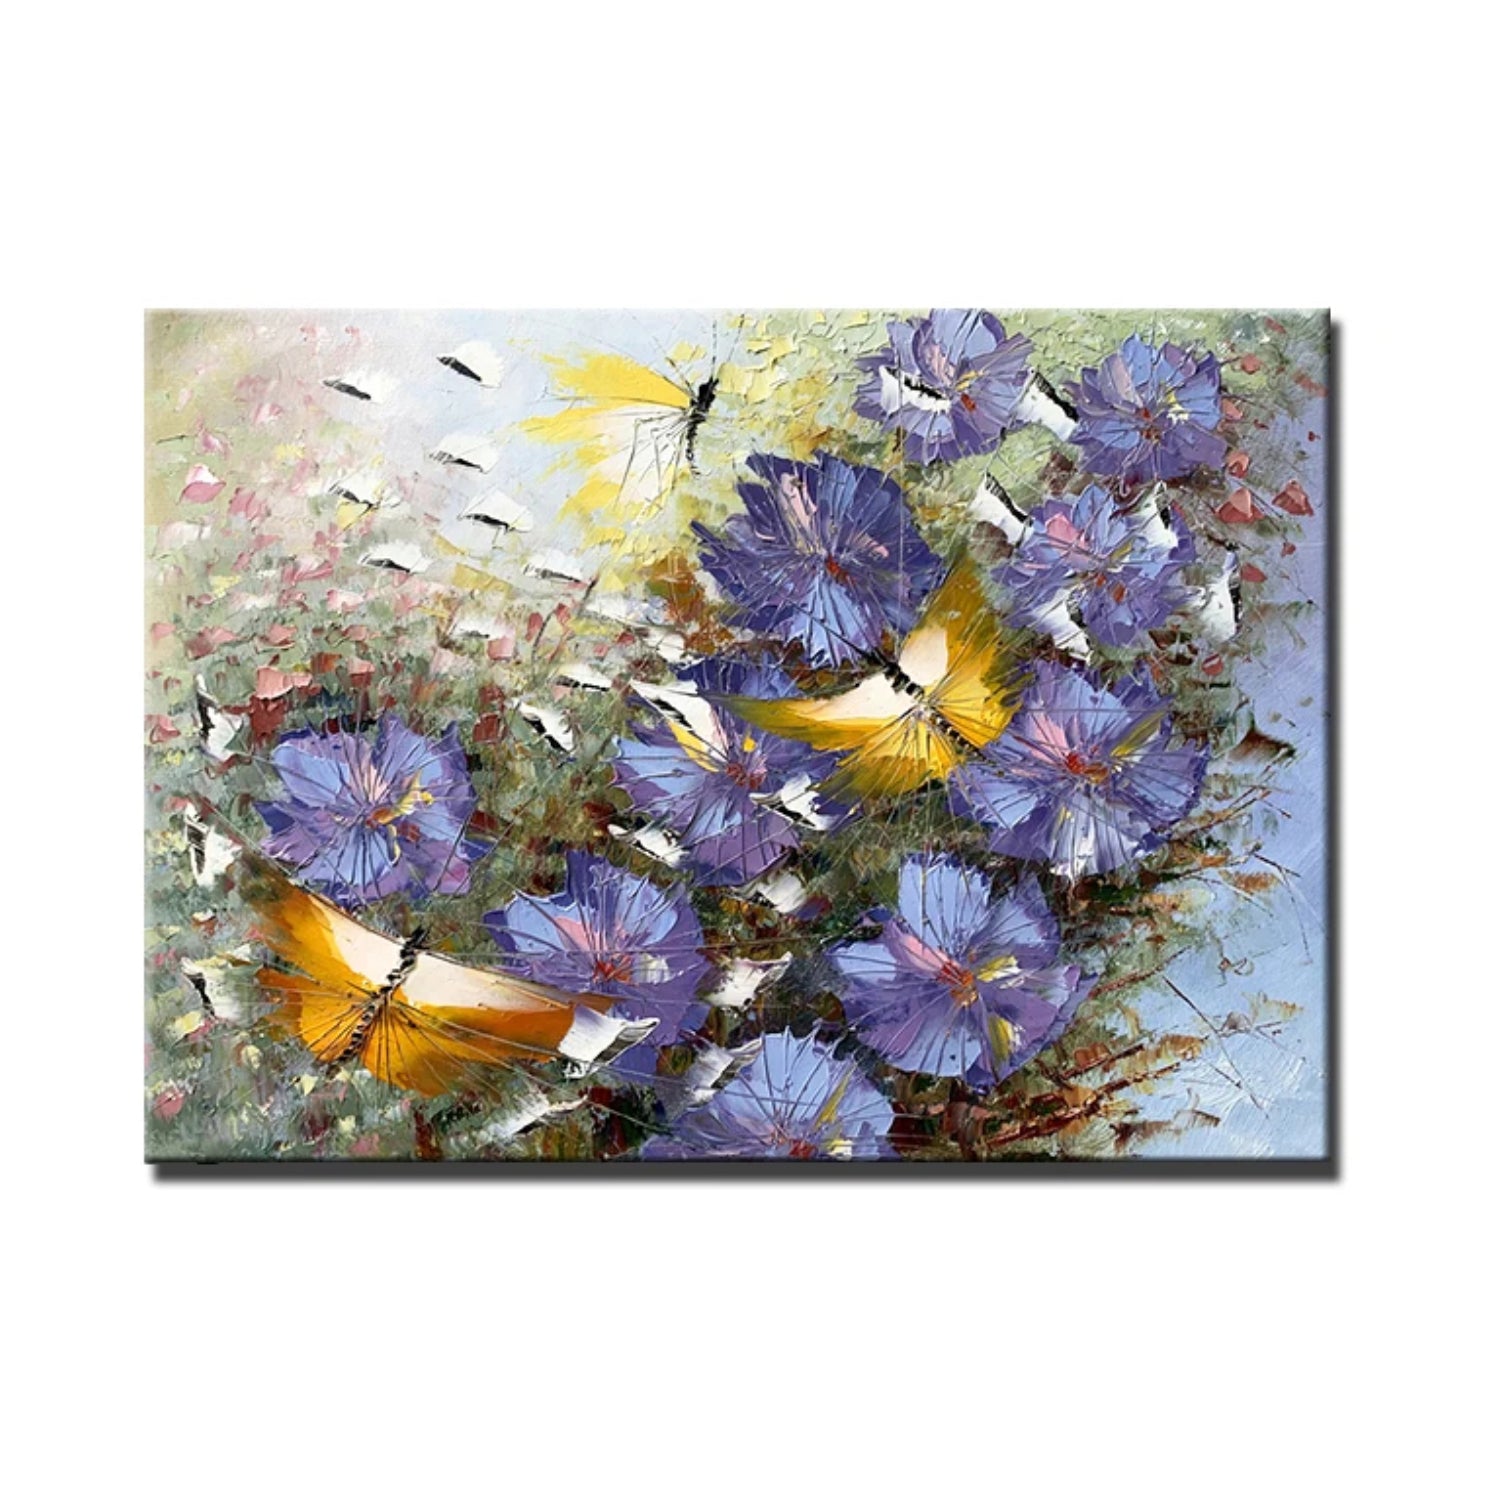 Abstract Butterflies Floral Landscape Impasto Wall Art